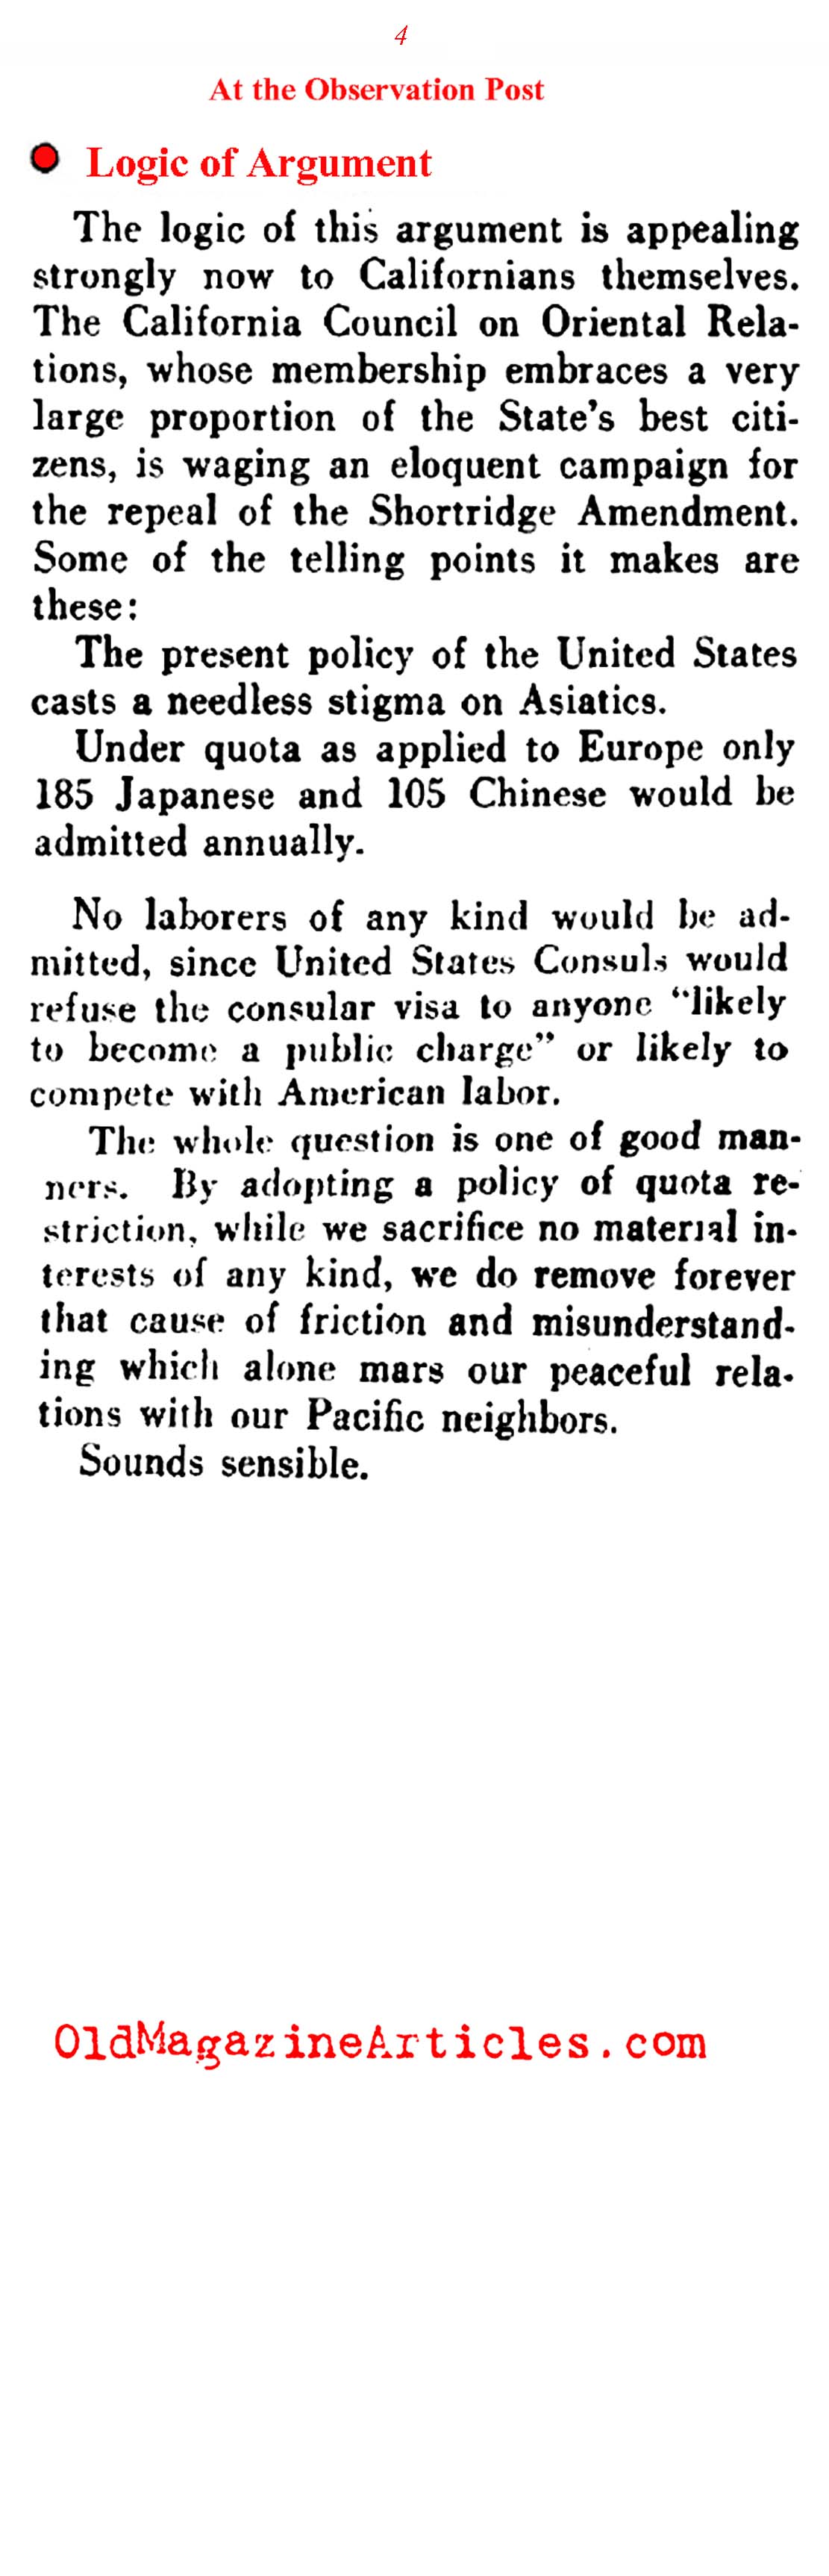 A Call to Repeal the Japanese Exclusion Act (Literary Digest, 1935)